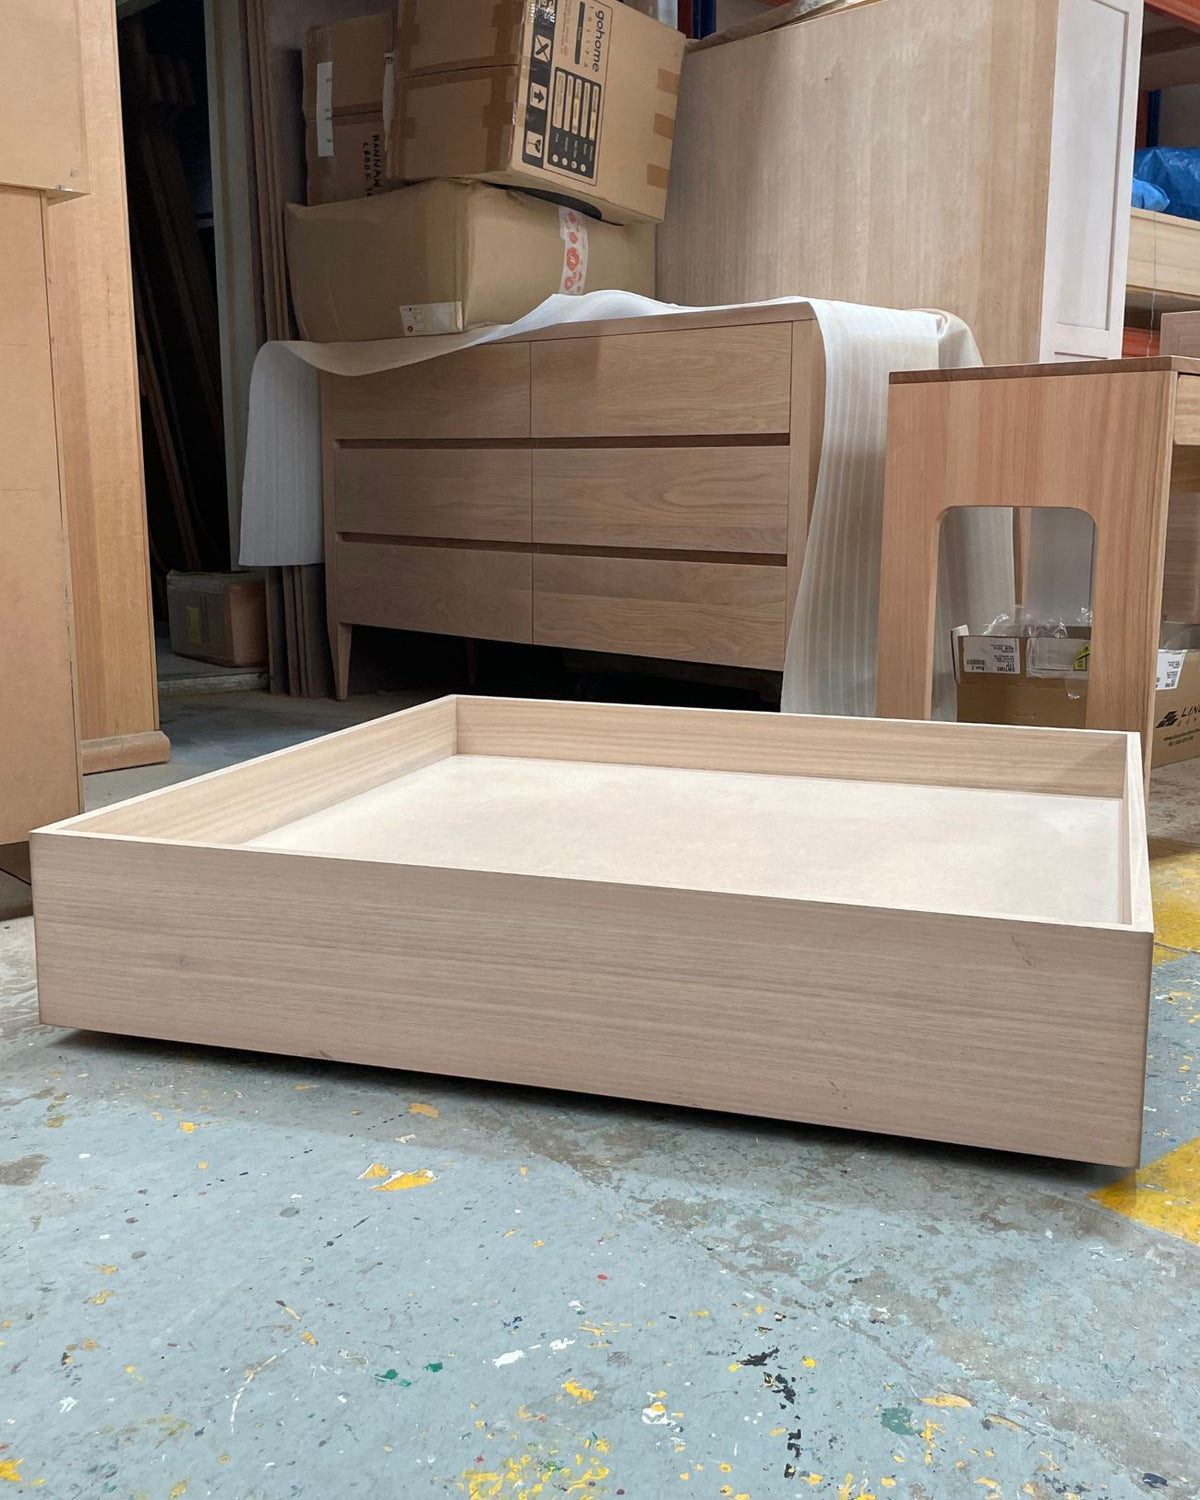 BRAND NEW - Slide this handy timber storage box, under your kid's beds. Perfect for storing extra blankets and hiding away toys. Available now for immediate dispatch. 2 in stock only.  SIZE: 102W x 107L x 22H cm  COLOUR: Whitewash  CONDITION: Brand NEW